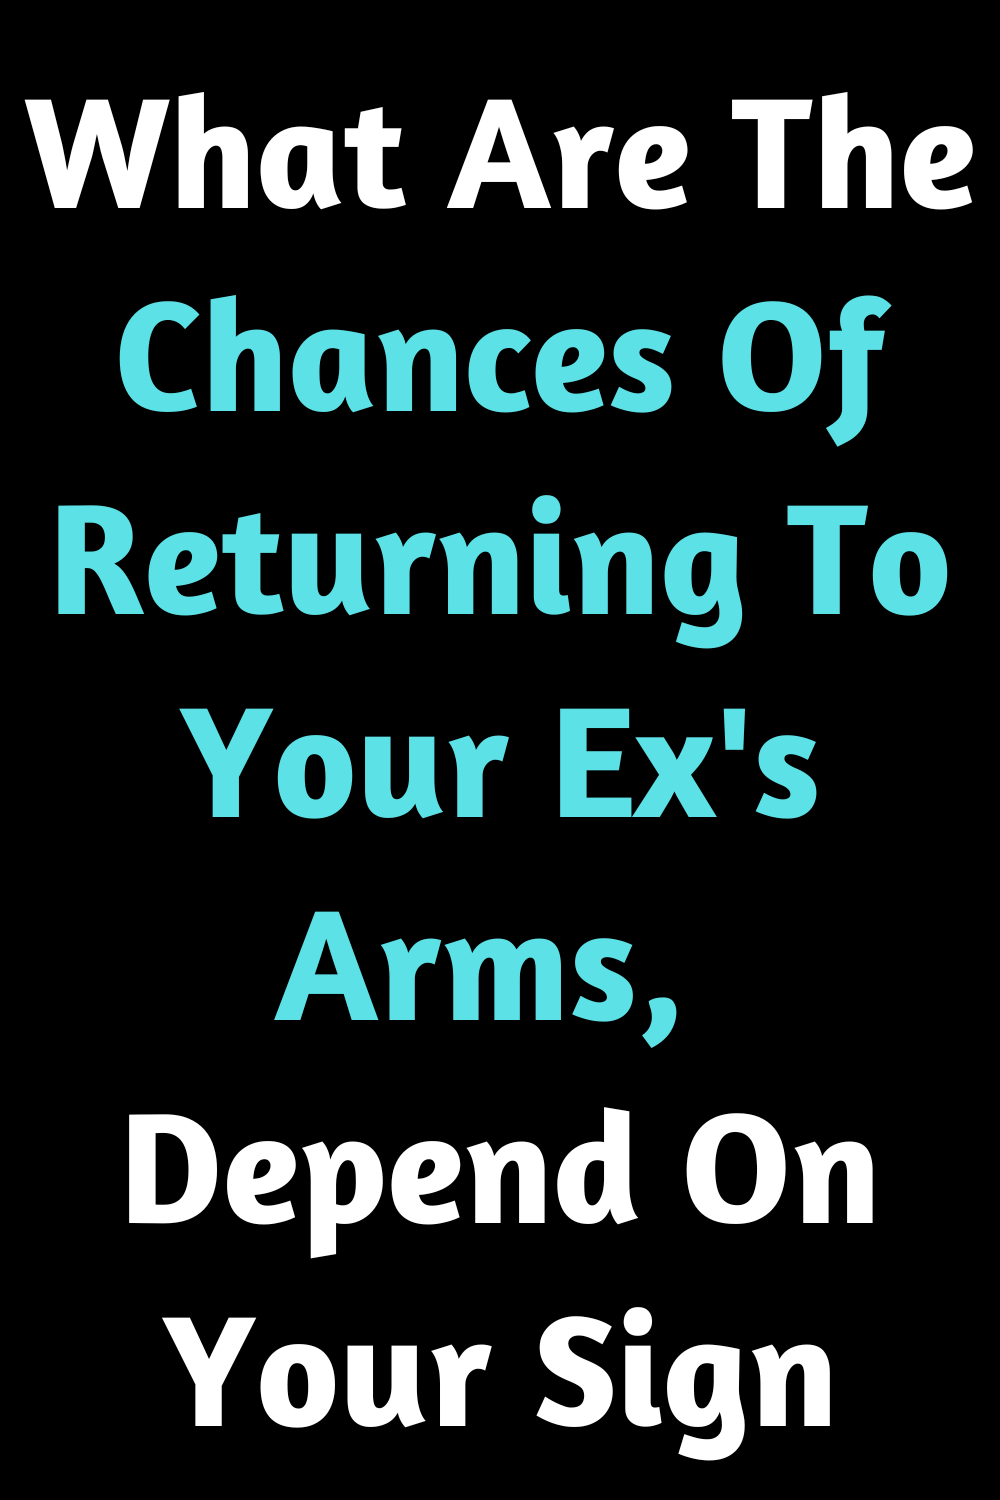 What Are The Chances Of Returning To Your Ex's Arms, Depend On Your Sign